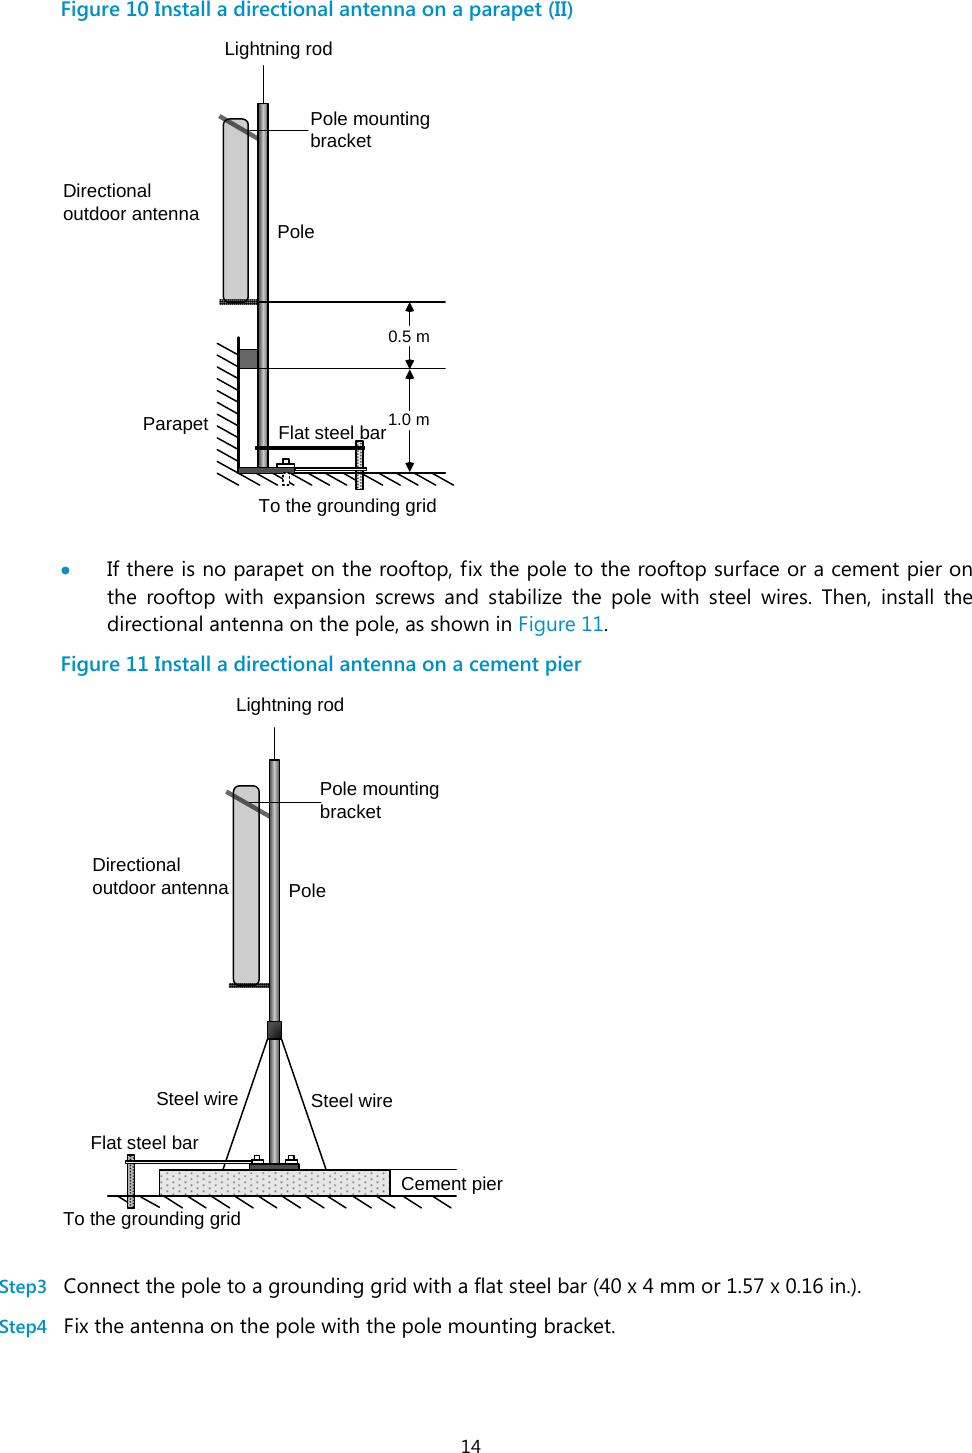  14 Figure 10 Install a directional antenna on a parapet (II) 0.5 m1.0 mLightning rodDirectional outdoor antenna PoleParapetPole mounting bracketFlat steel barTo the grounding grid    If there is no parapet on the rooftop, fix the pole to the rooftop surface or a cement pier on the rooftop with expansion screws and stabilize the pole with steel wires. Then, install the directional antenna on the pole, as shown in Figure 11. Figure 11 Install a directional antenna on a cement pier Cement pierSteel wirePoleDirectional outdoor antennaLightning rodPole mounting bracketFlat steel barTo the grounding gridSteel wire  Step3 Connect the pole to a grounding grid with a flat steel bar (40 x 4 mm or 1.57 x 0.16 in.).  Step4 Fix the antenna on the pole with the pole mounting bracket.  